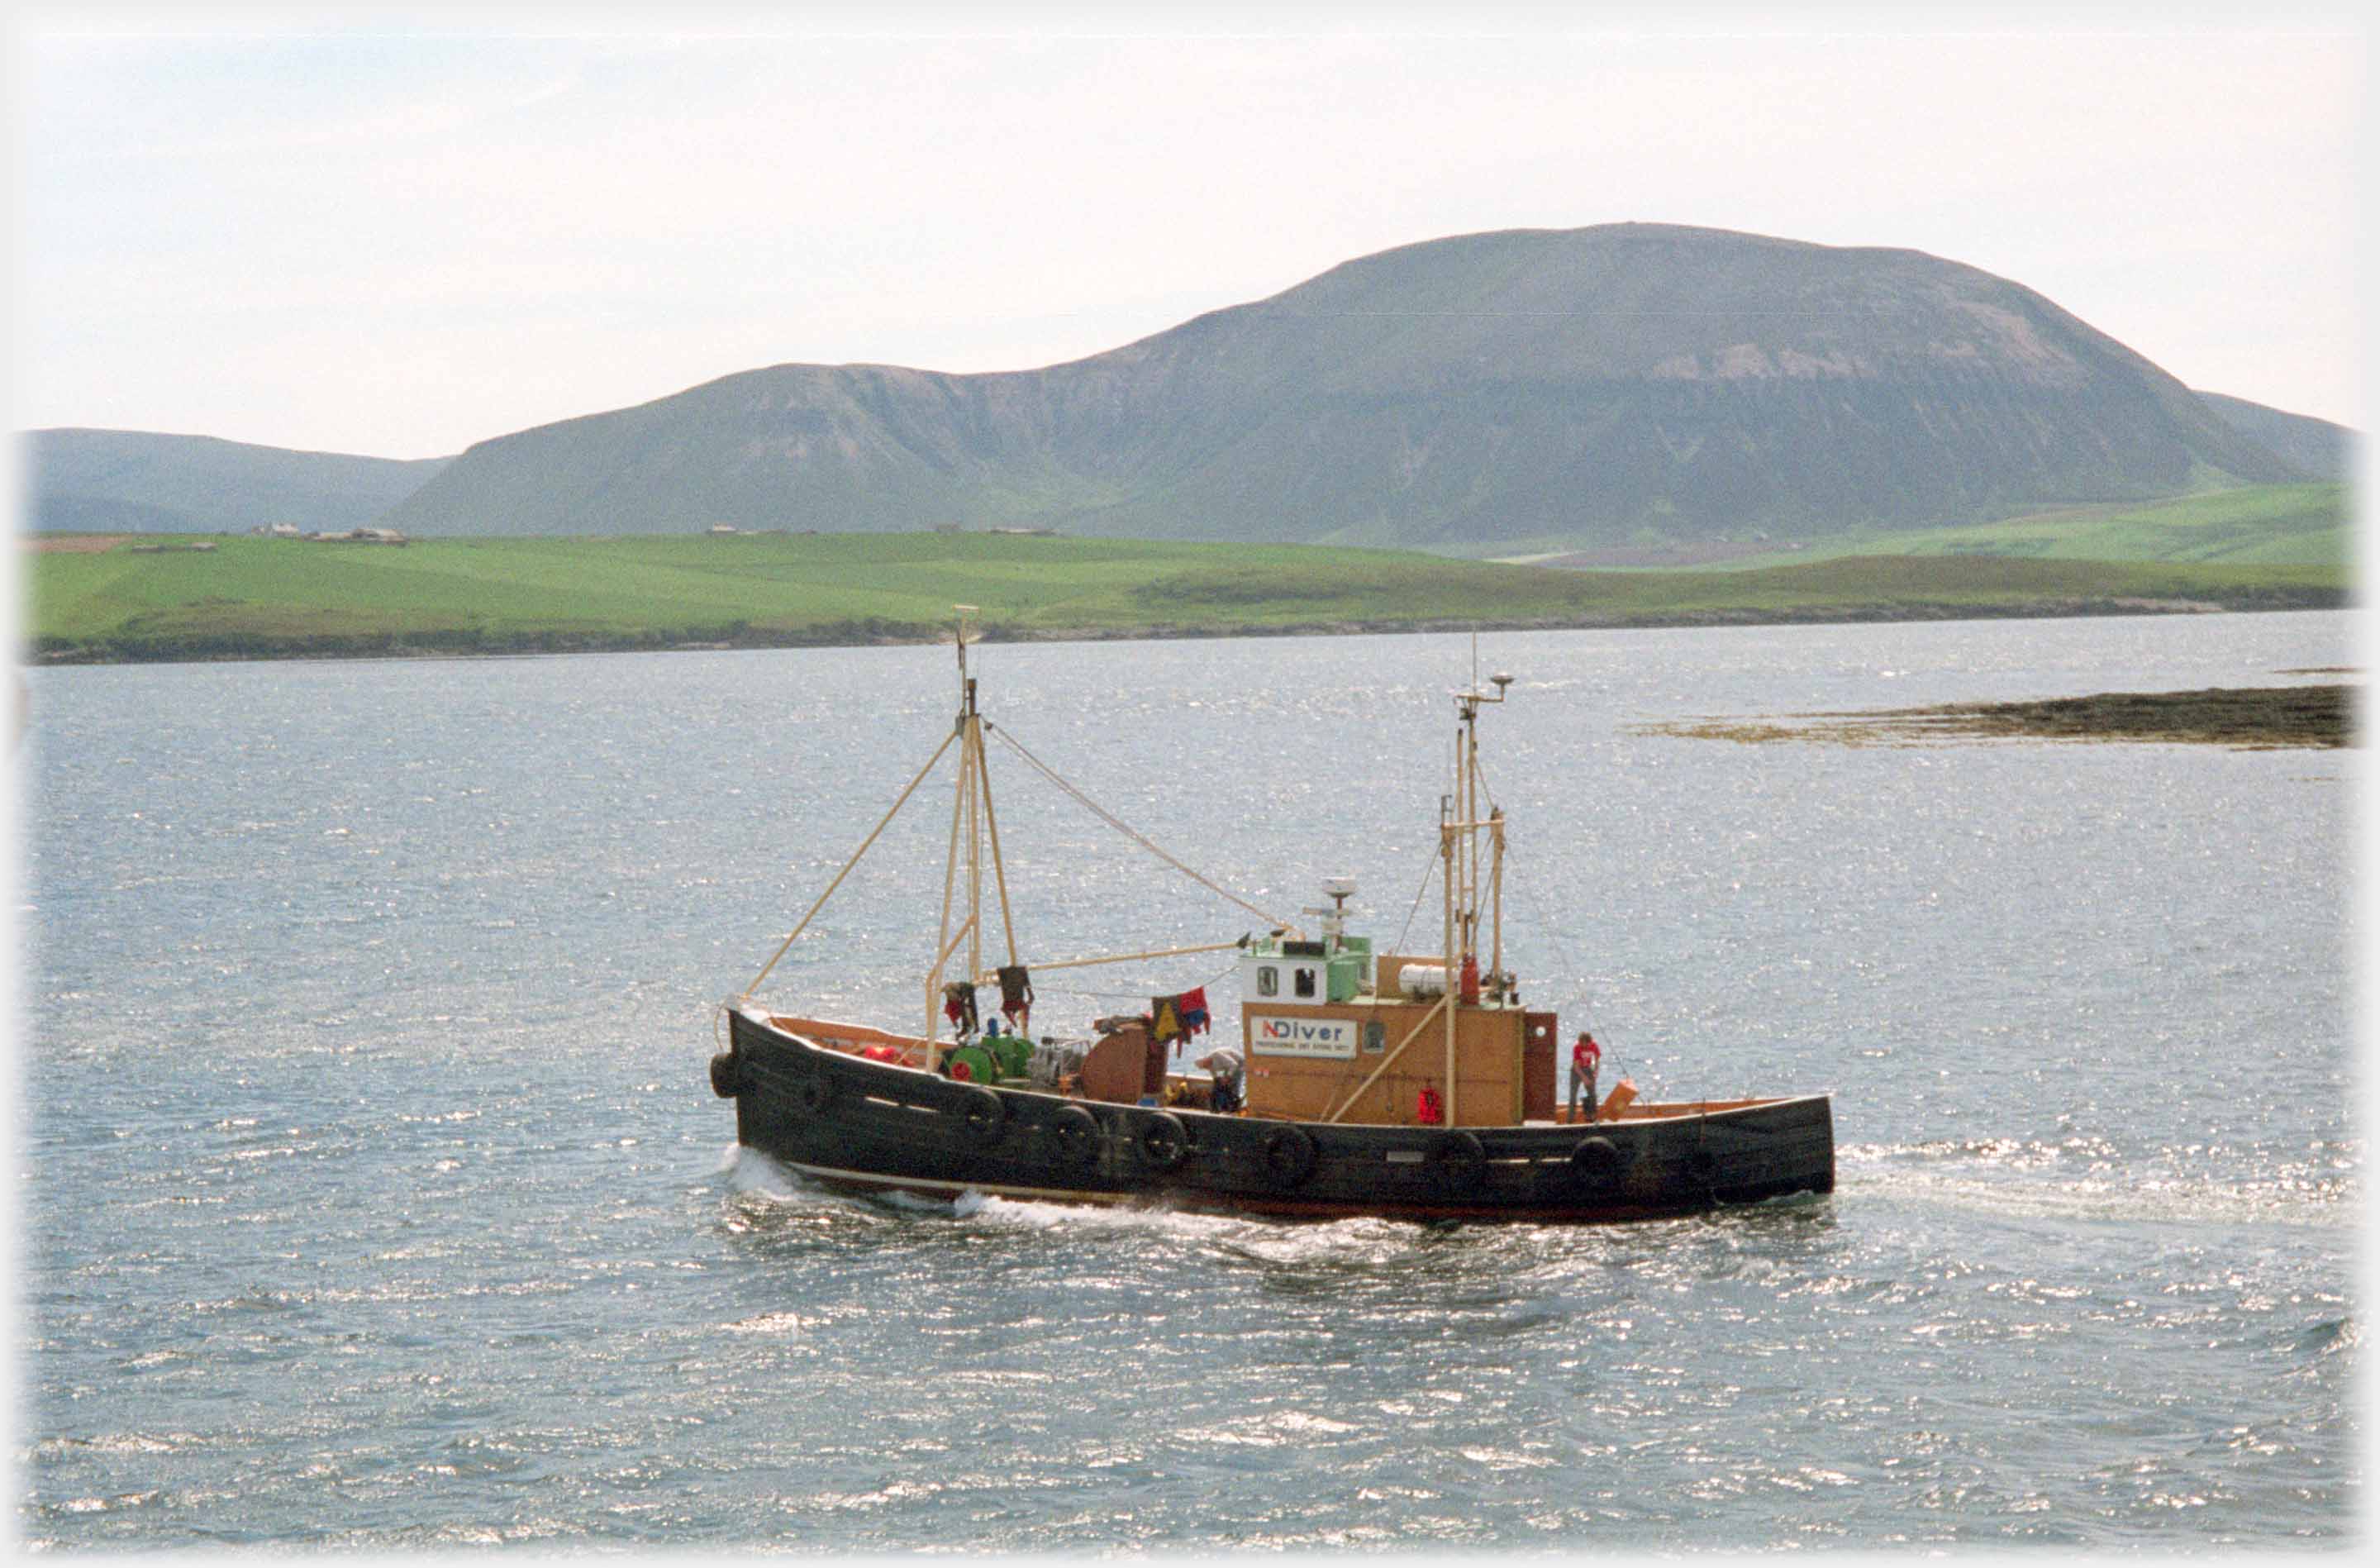 Small fishing boat moving in sea with Hoy hill behind.